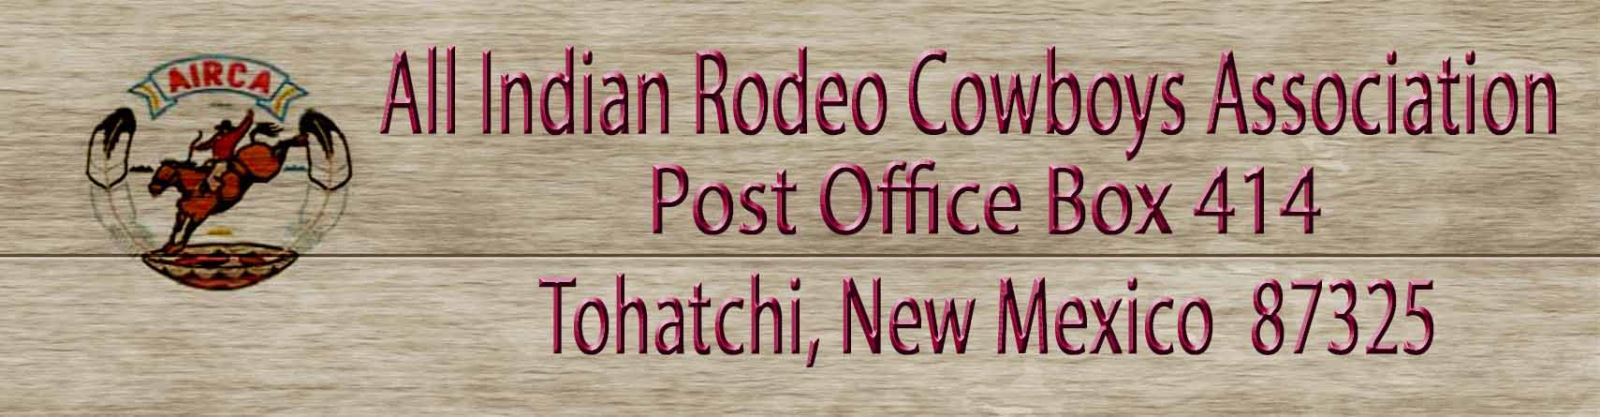 All Indian Rodeo Cowboys Association